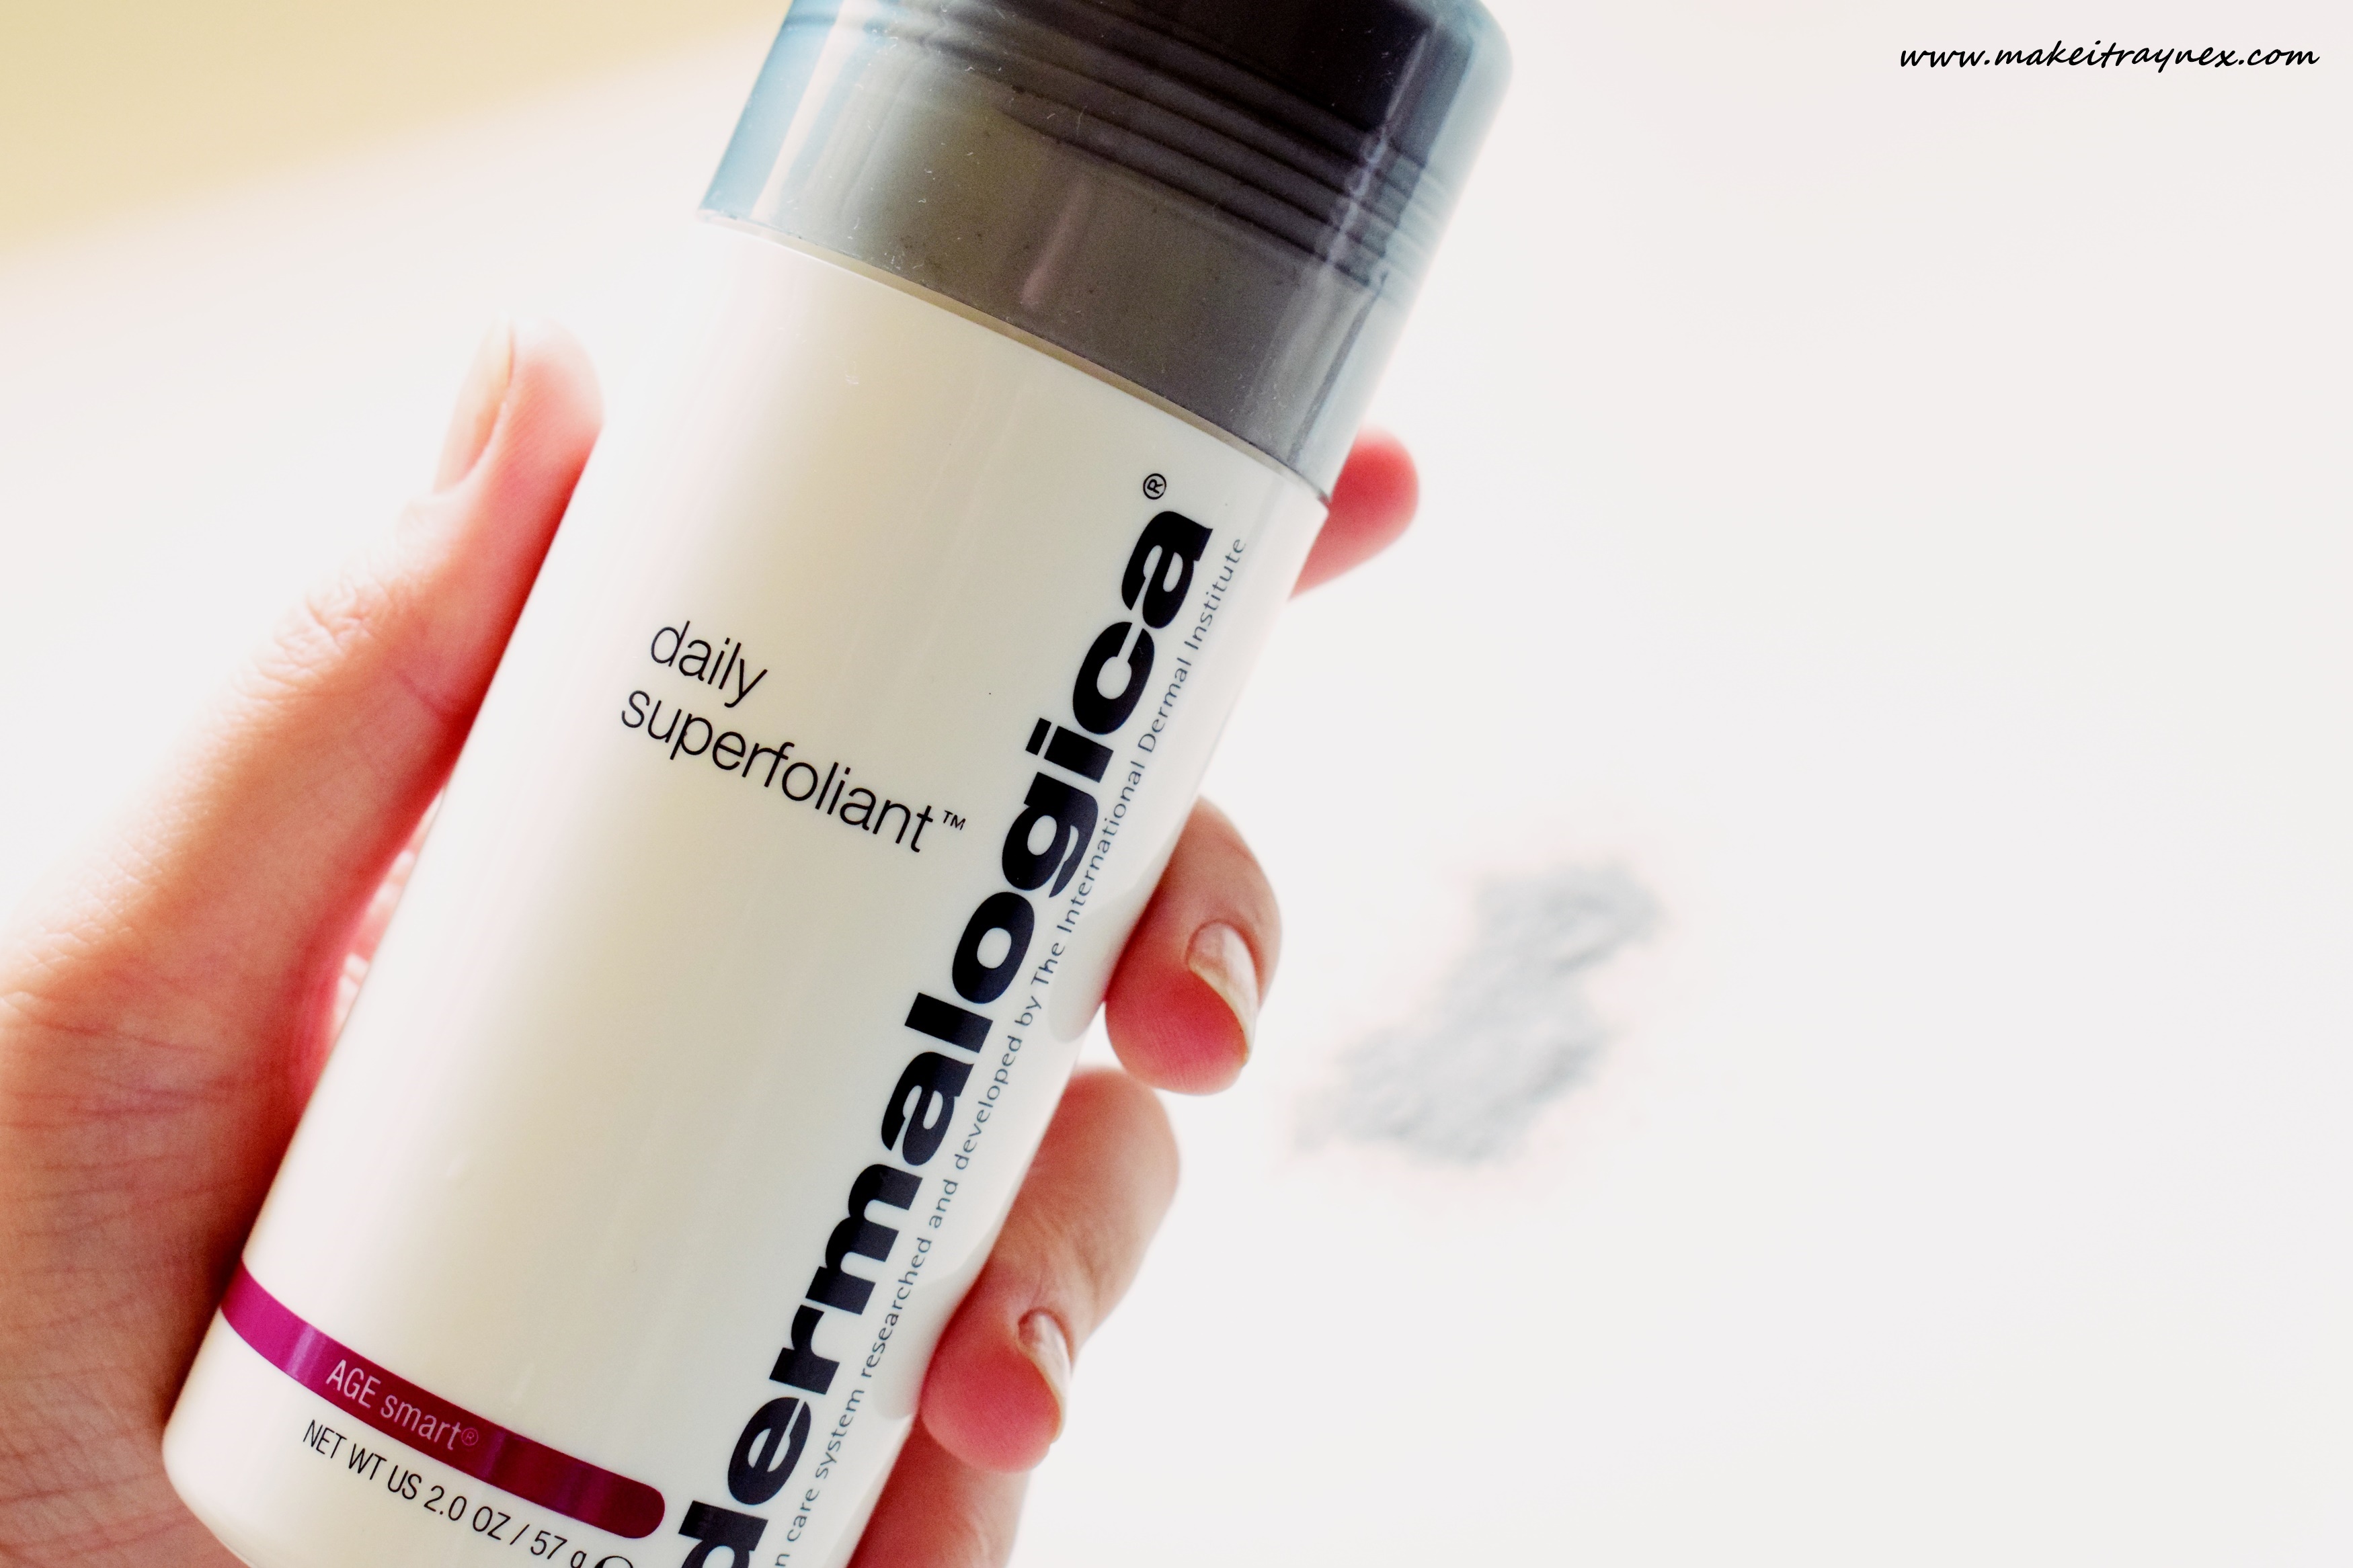 Introducing… the new daily superfoliant from dermalogica {REVIEW}